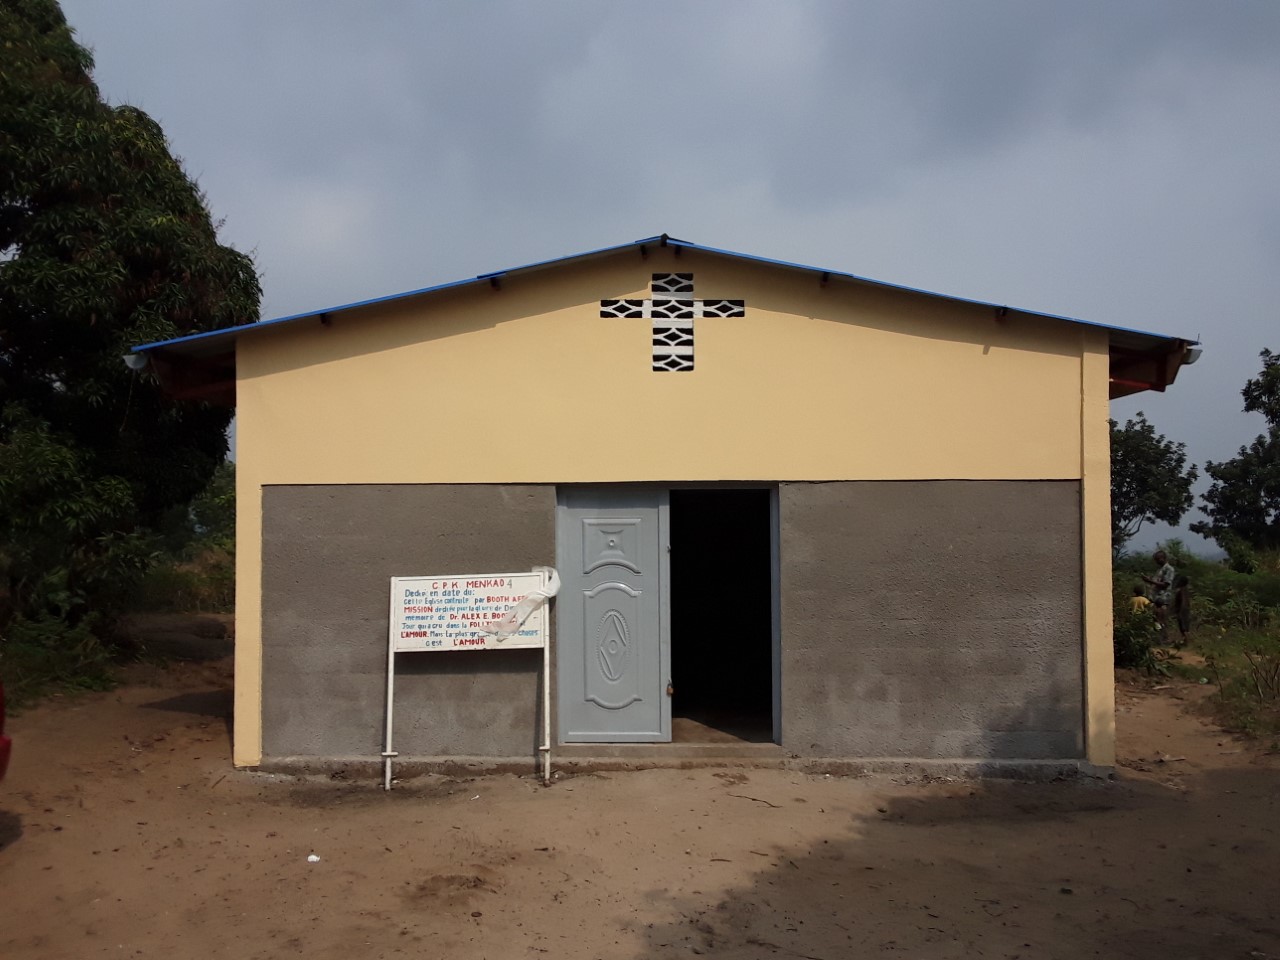 CPK Menkao IV church after construction with funding (church built with funding from Booth Family Initiative). Photo by Mr. Omba Ngandu.